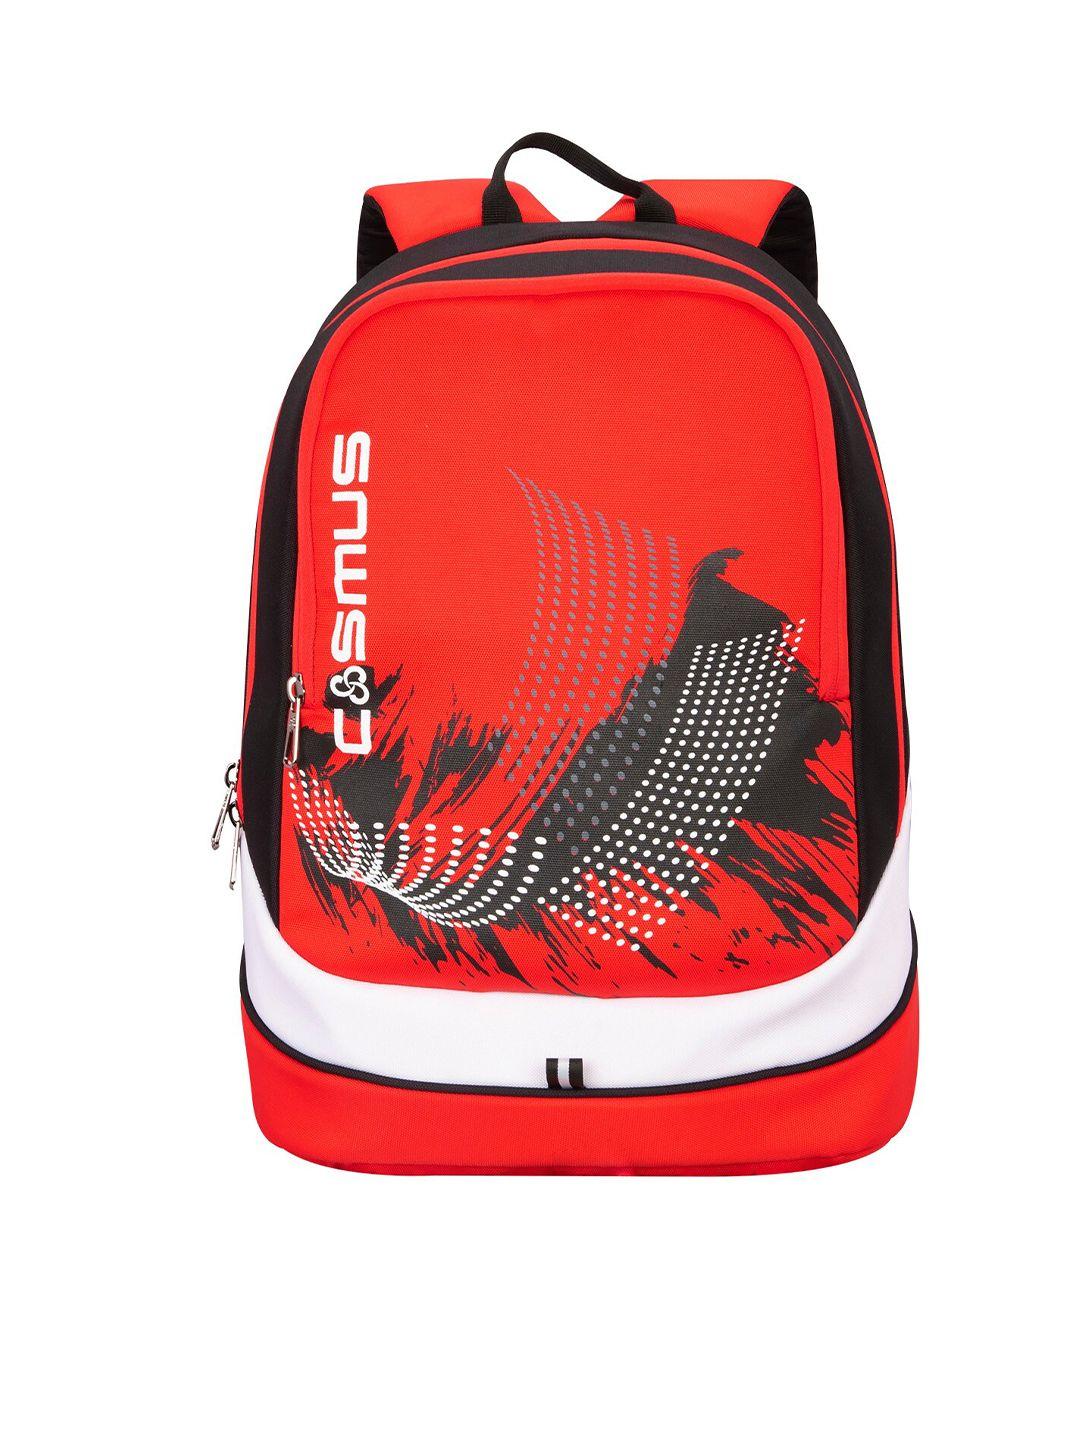 cosmus red 16 inch laptop backpack